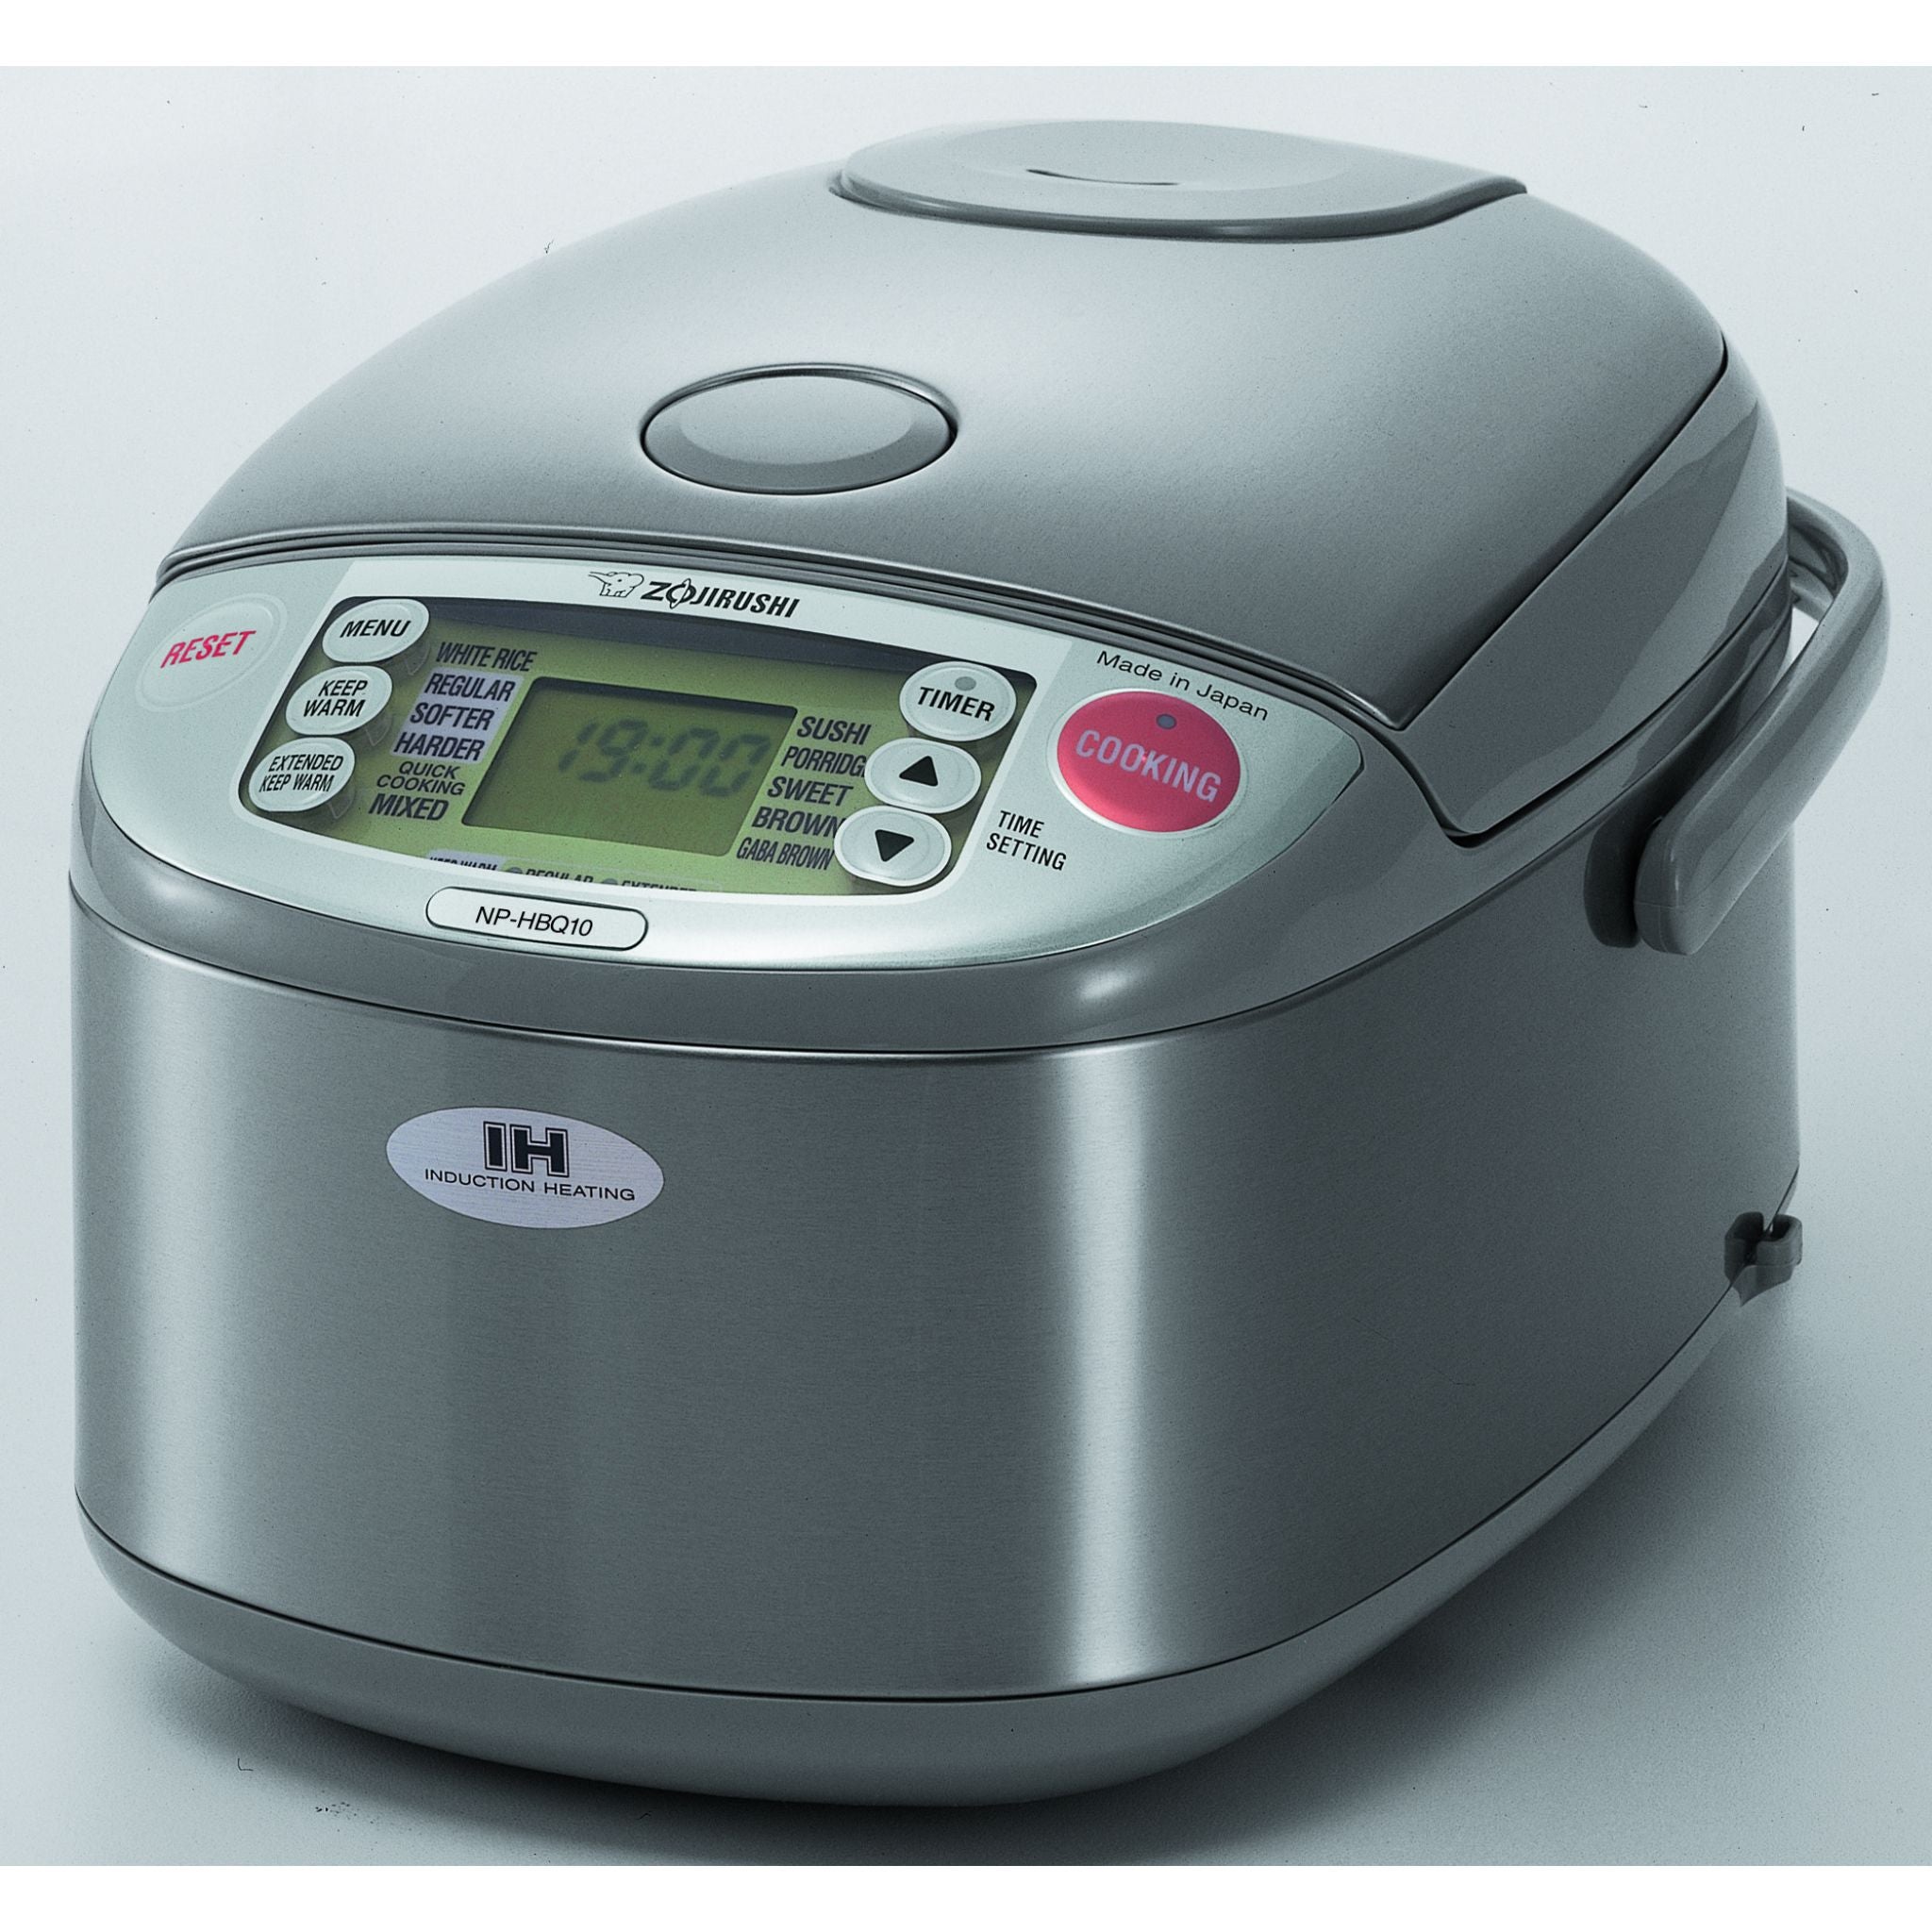 ZOJIRUSHI 1.8L Micom Fuzzy Logic Induction Heating Rice Cooker/Warmer (Stainless Steel) (NP-HBQ18)